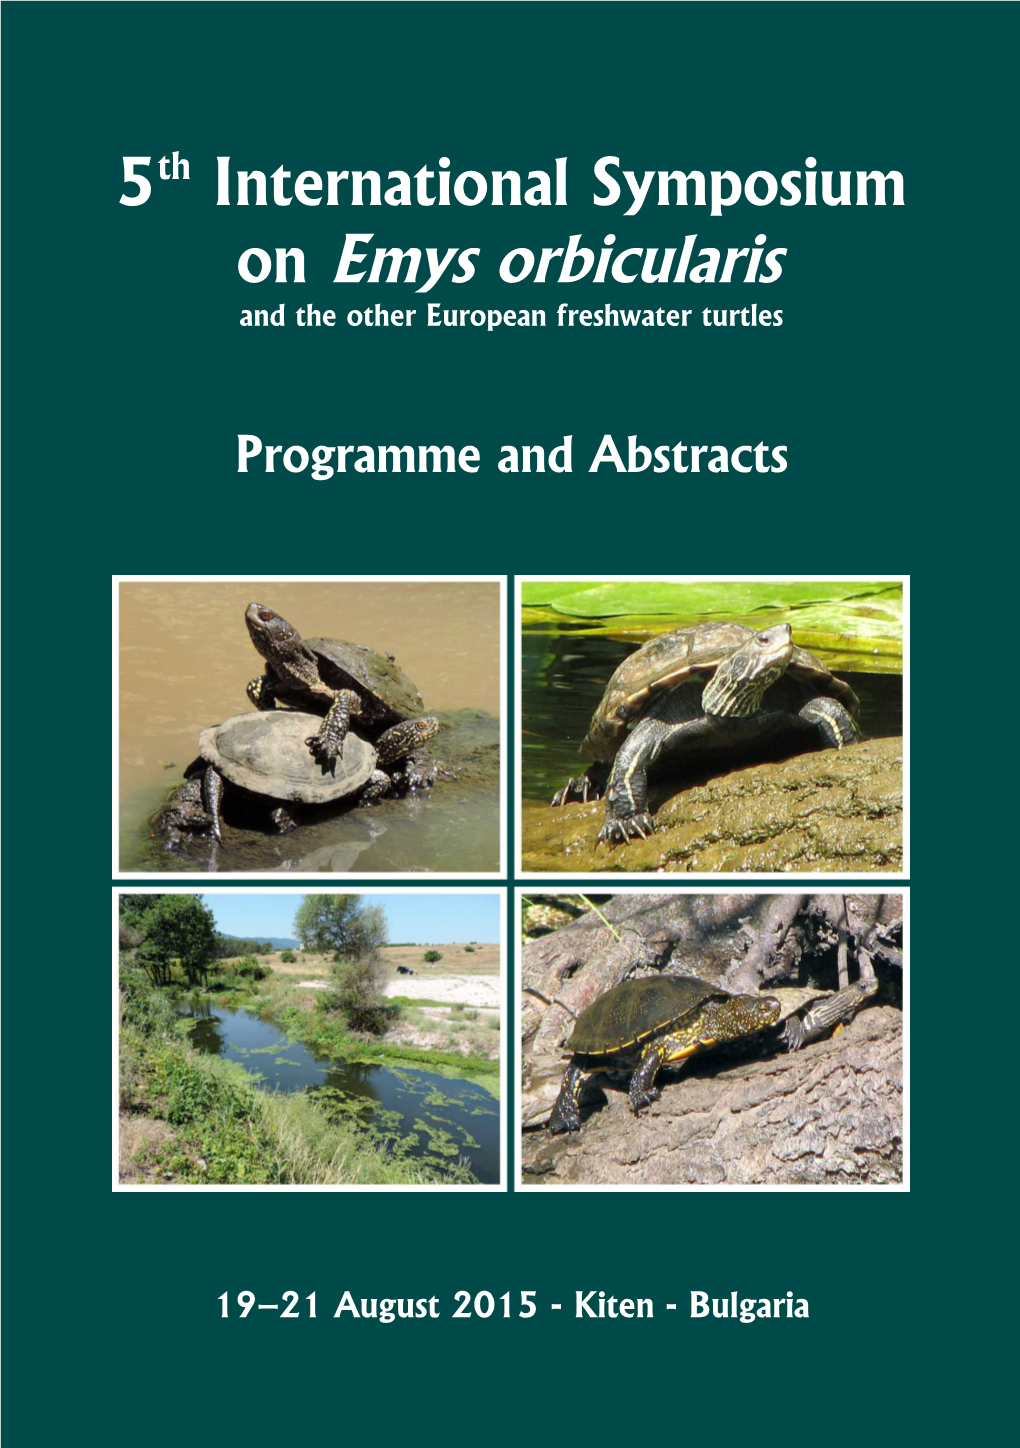 On Emys Orbicularis and the Other European Freshwater Turtles